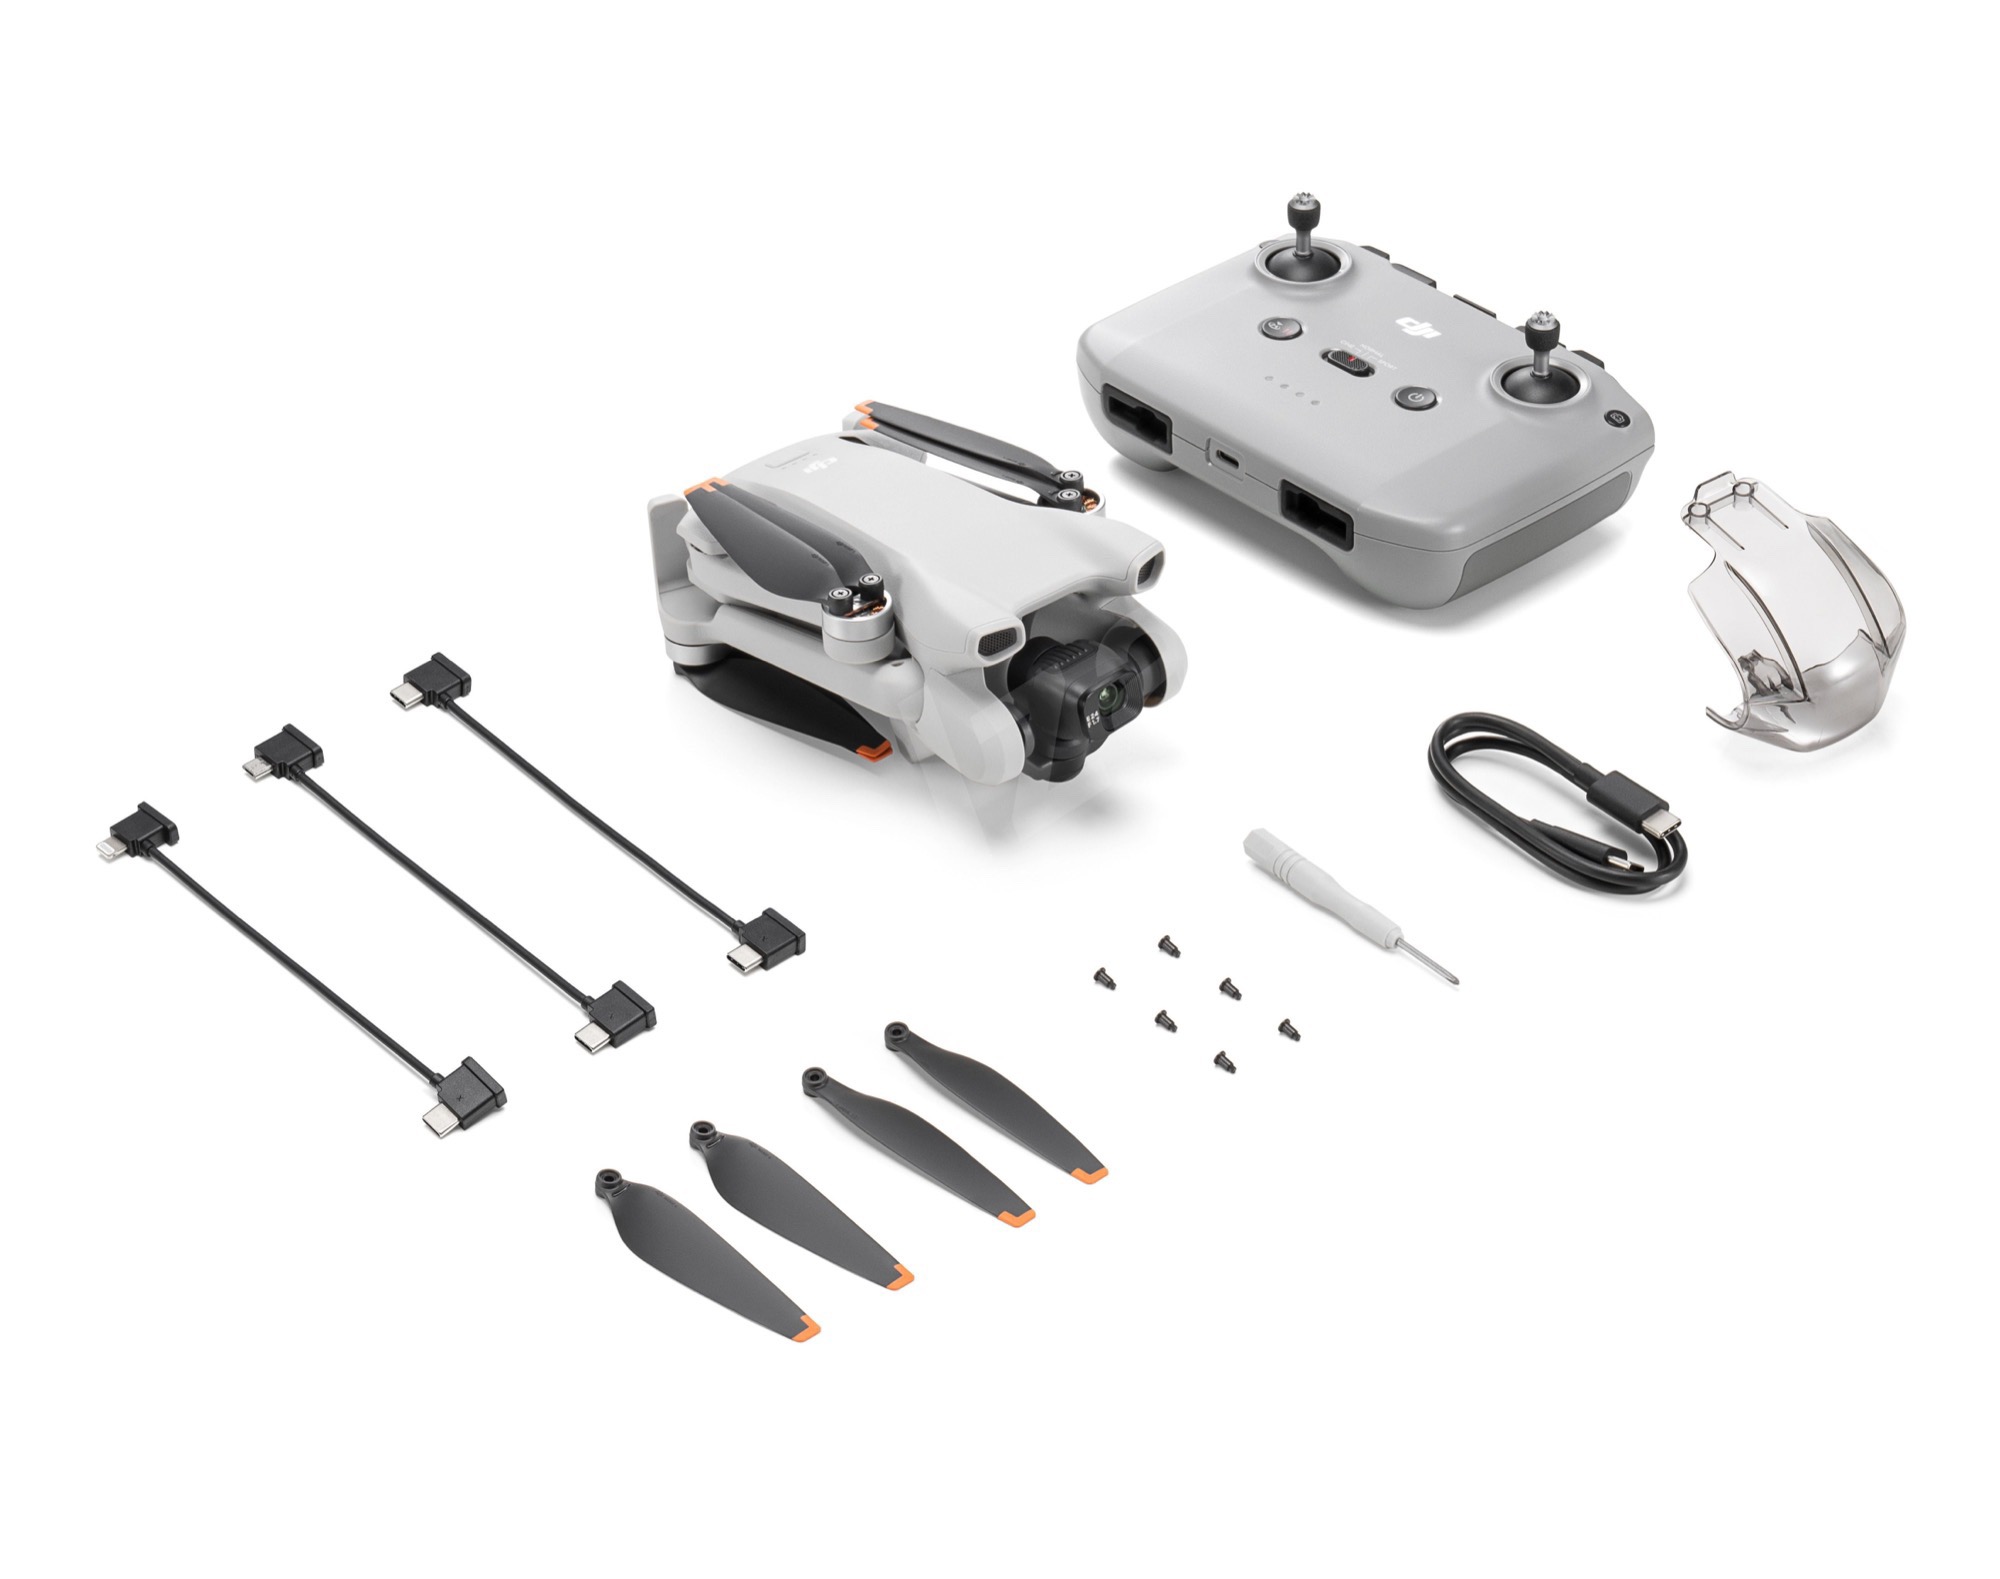 DJI Mini 2 SE: Leak reveals specifications including 31 minutes runtime and  10 km range -  News